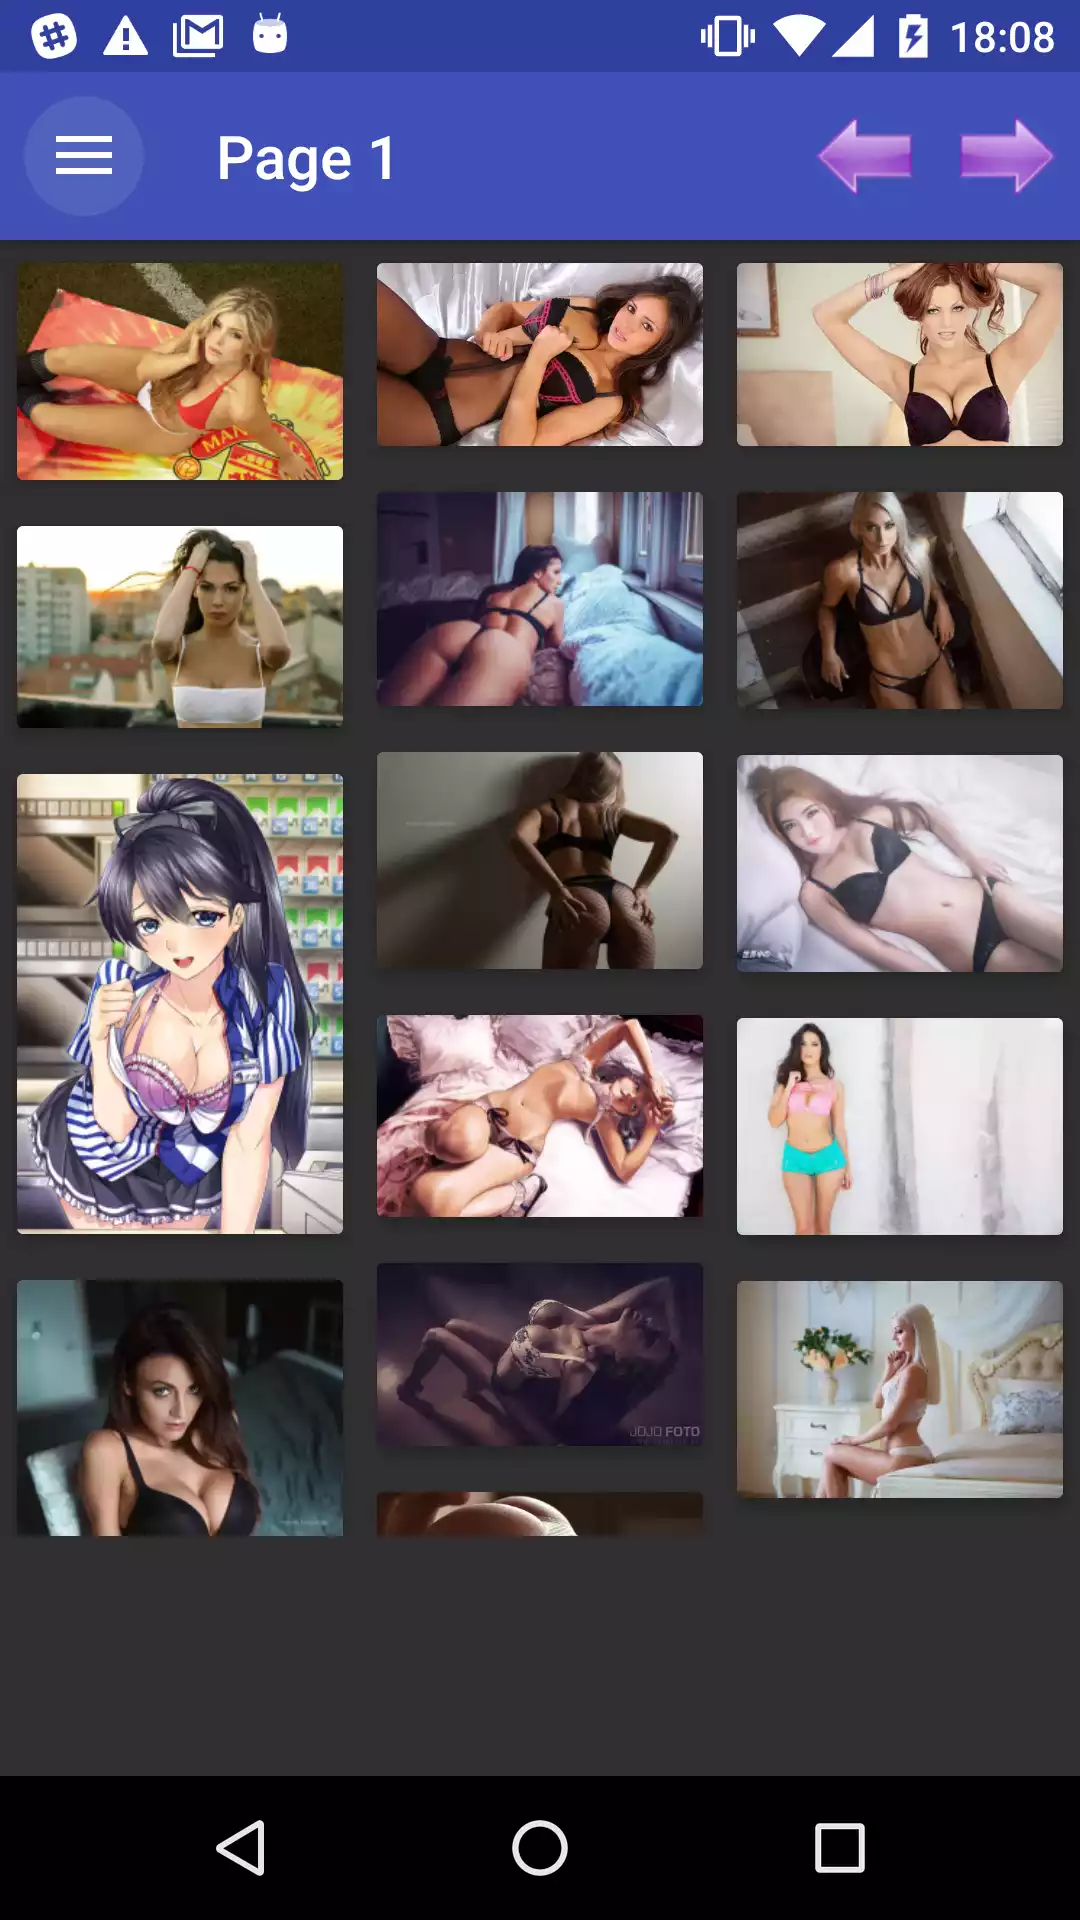 Bra Wallpapers apps,sexy,hantai,wallpaper,image,best,wallpapers,pic,porn,new,with,pegging,hentai,backgrounds,gallery,pics,app,download,photos,erotic,black,hentei